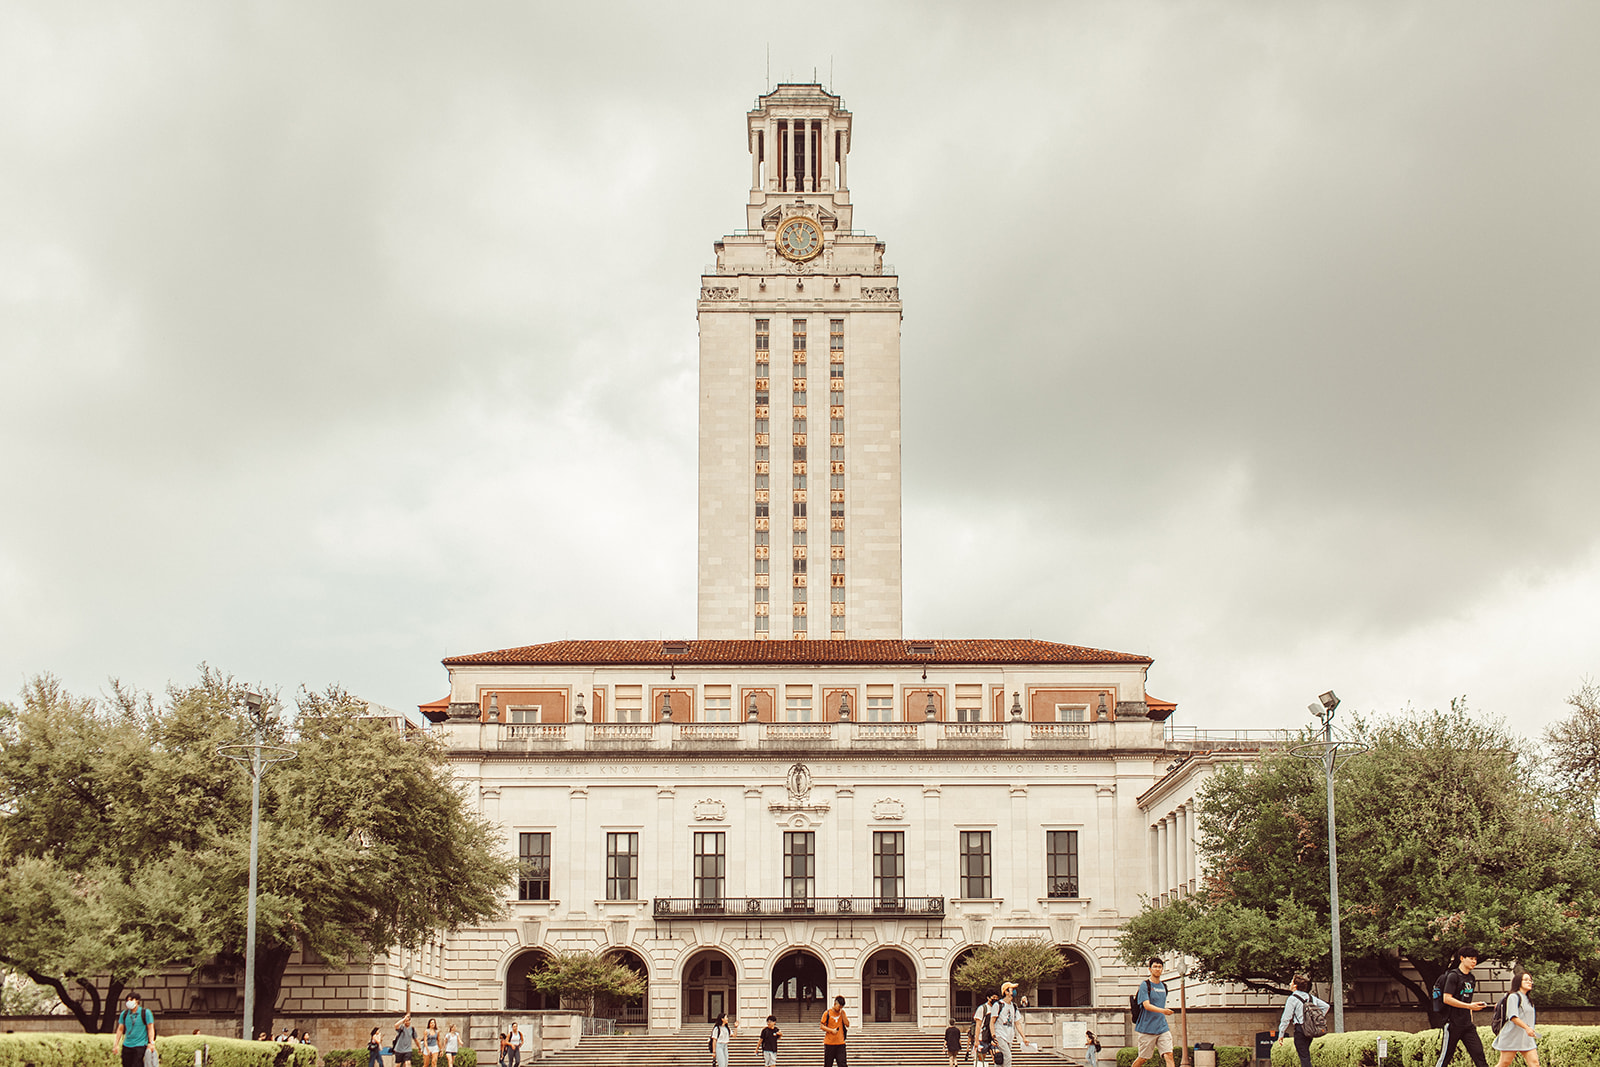 The UT tower at the University of Texas at Austin.